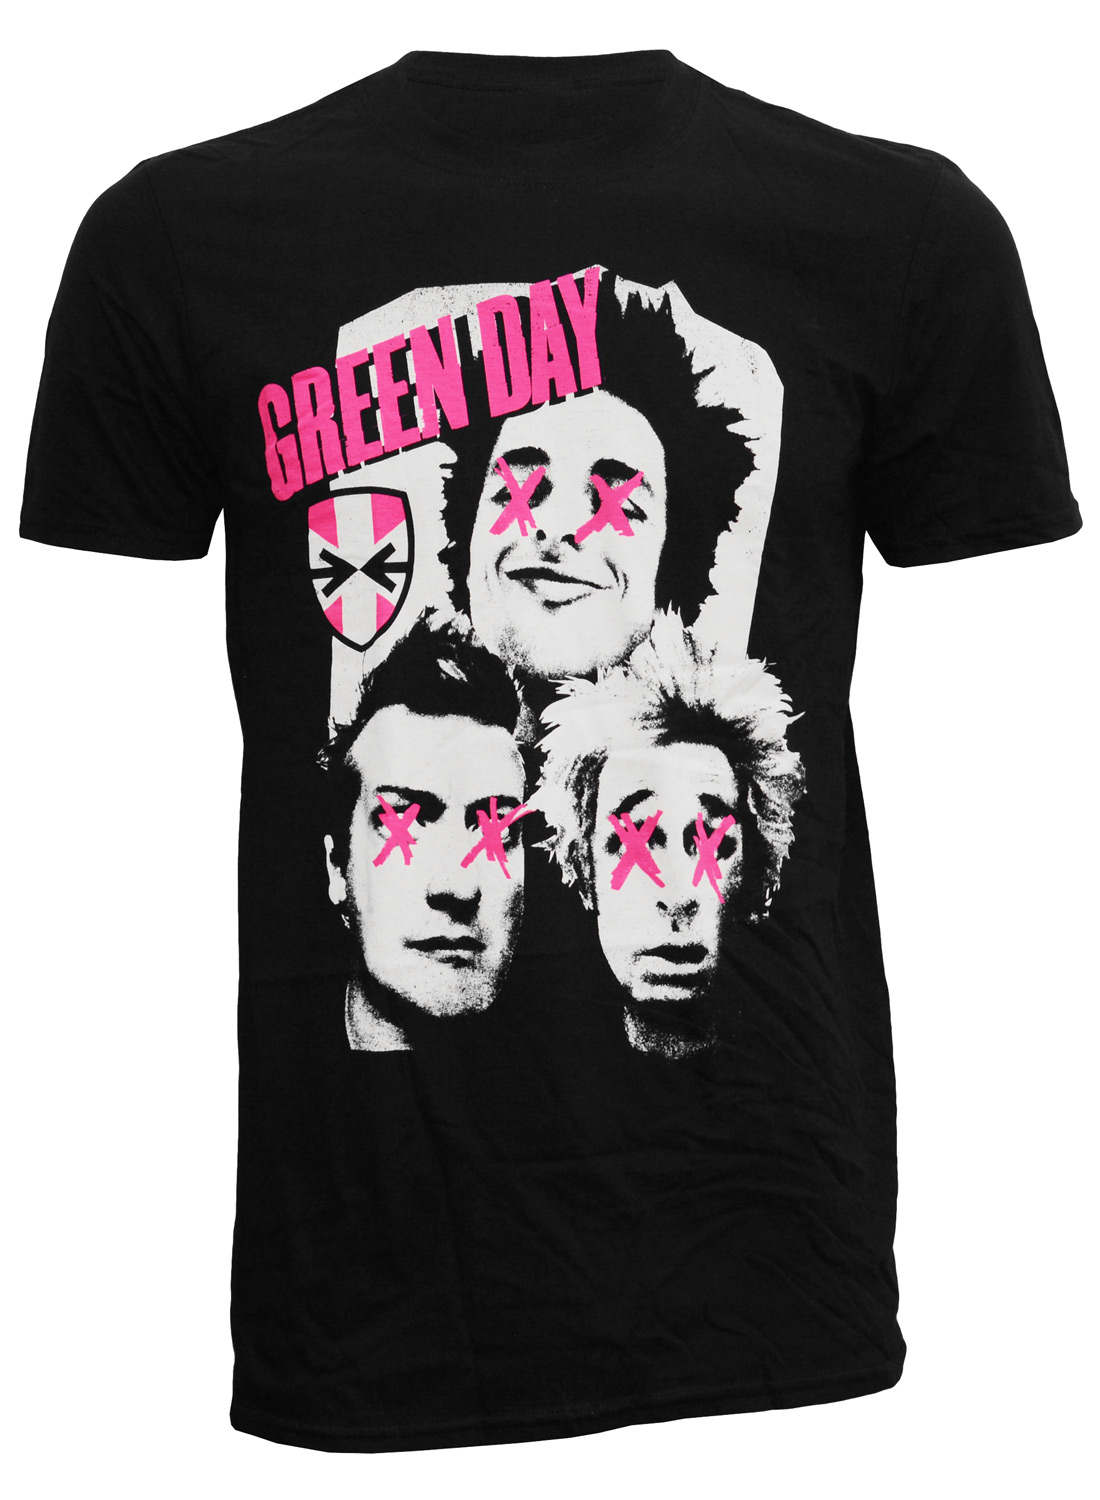 Green Day Patchwork T-shirt